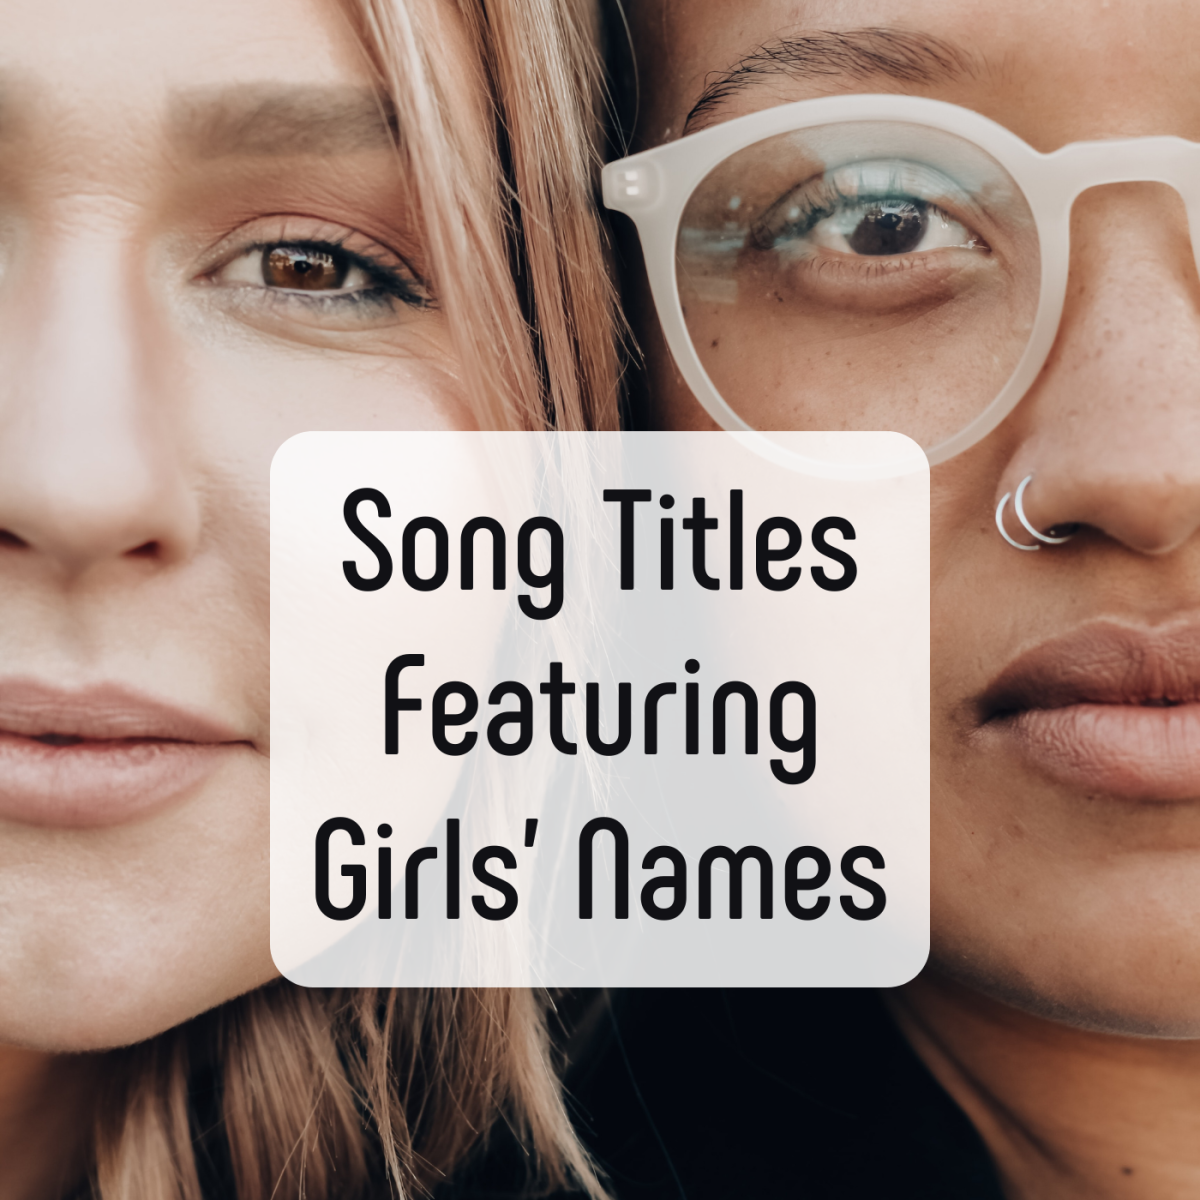 Sue, Jenny, Gloria, Billie Jean . . . there's are tons of famous songs that feature women's names. 